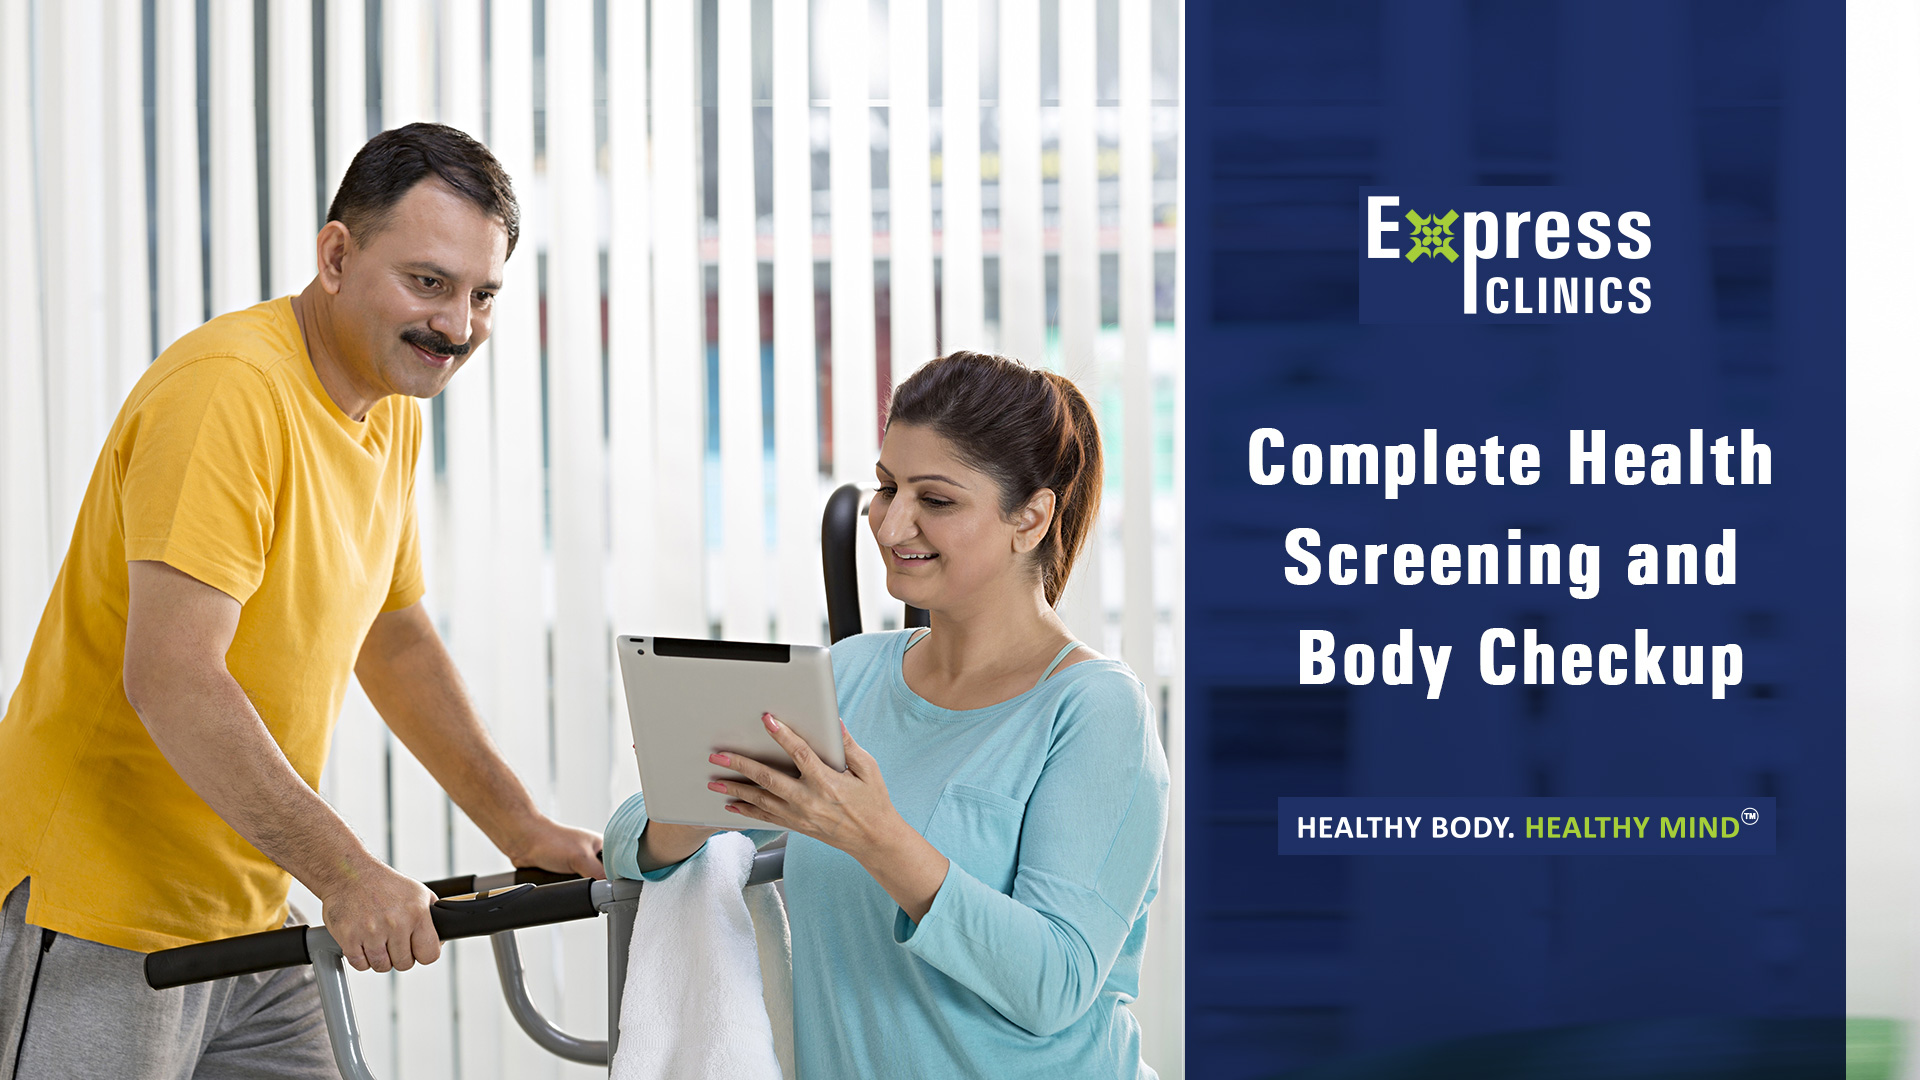 Complete Health Screening and Body Checkup